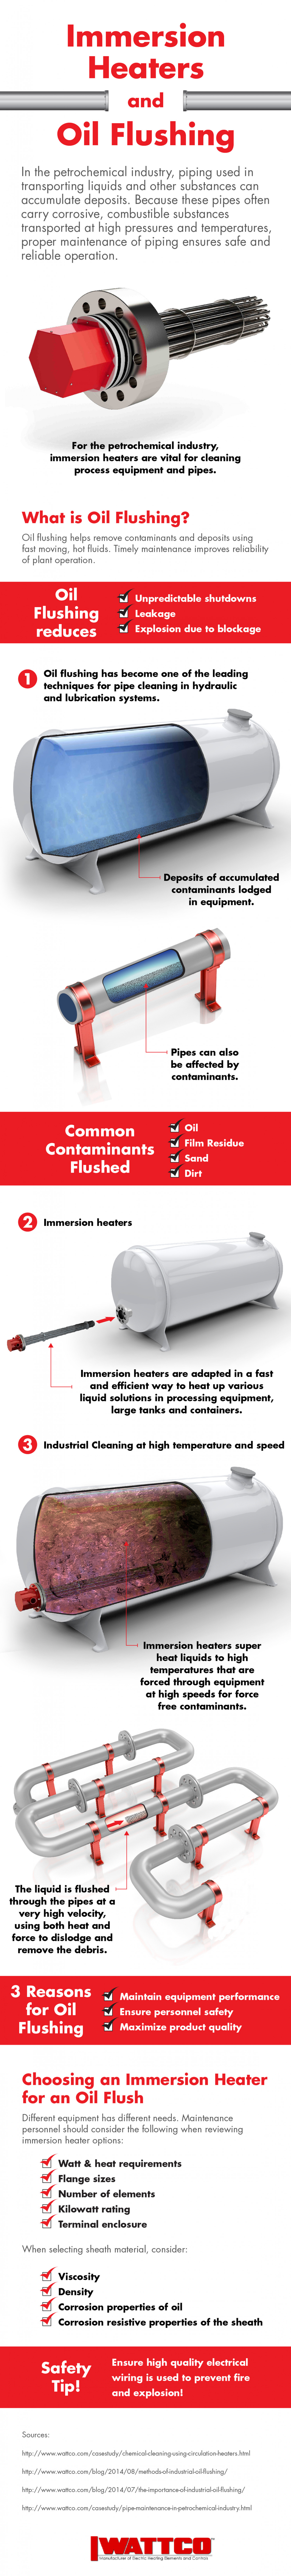 Immersion Heaters and Oil Flushing Infographic